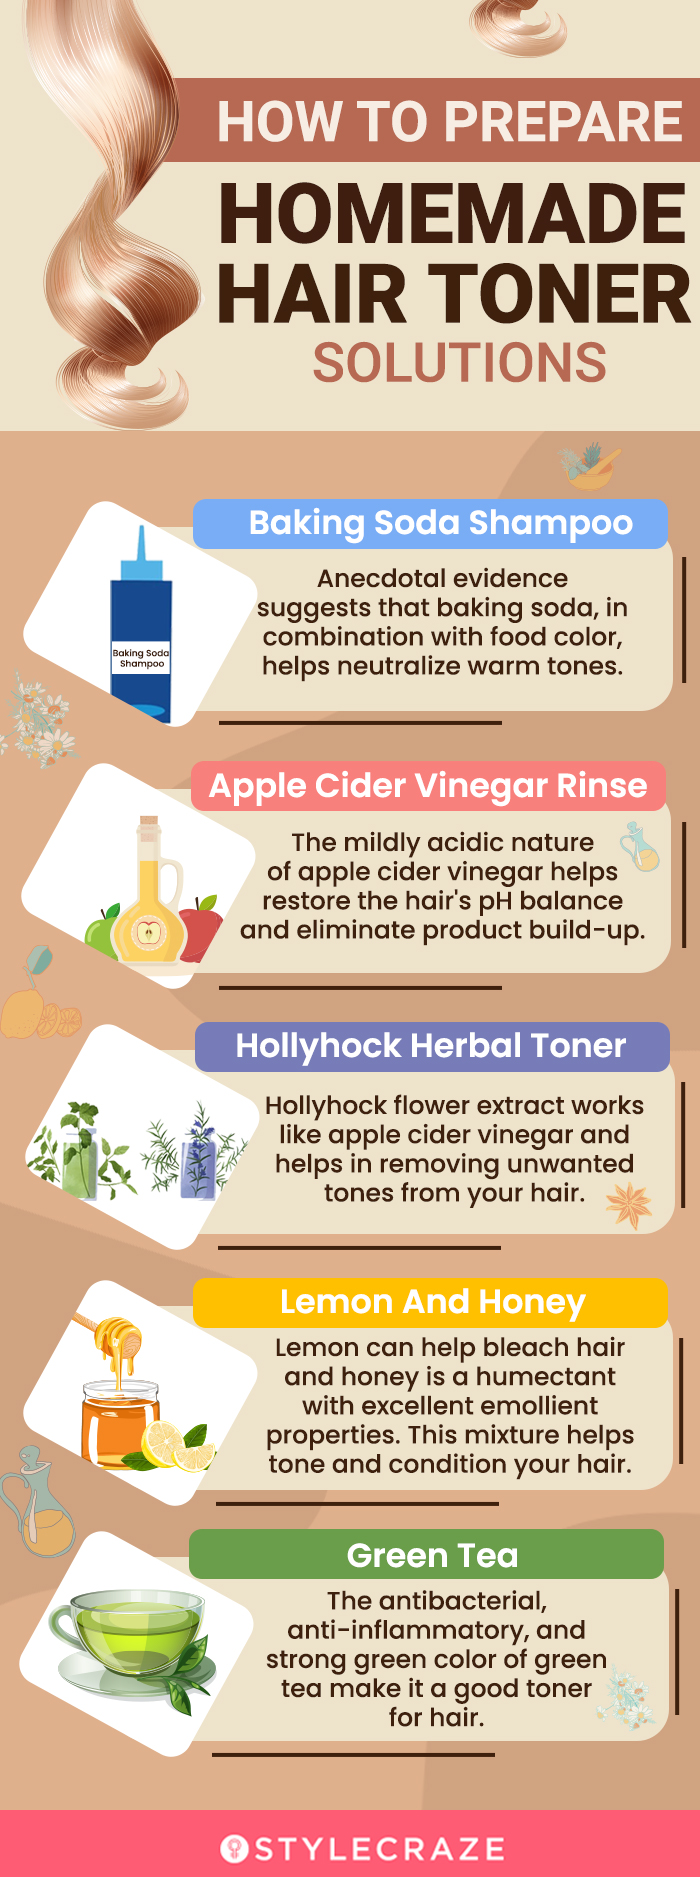 how to prepare homemade hair toner solutions (infographic)